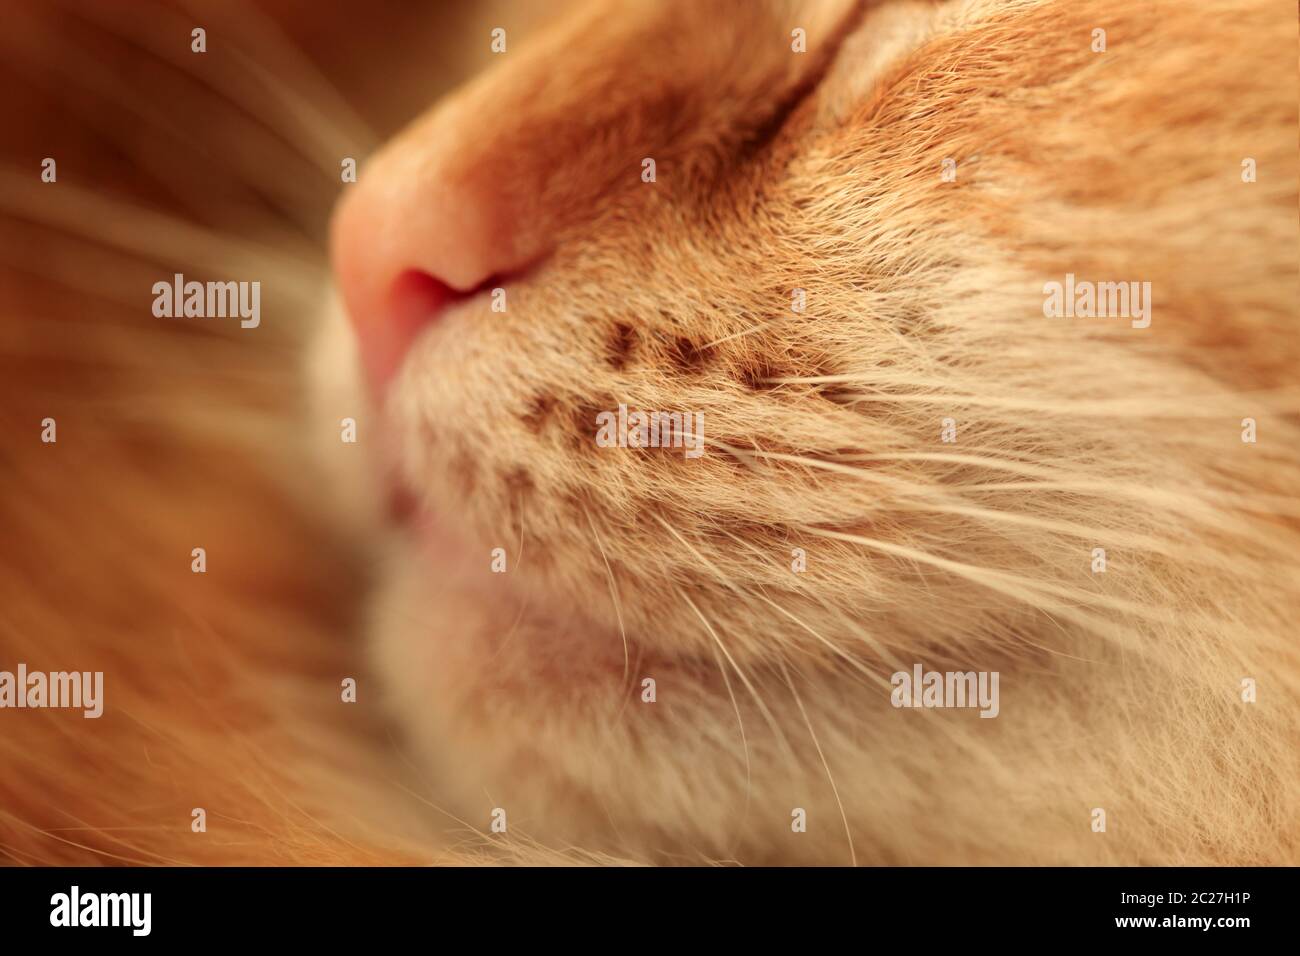 Nose of a ginger cat close up Stock Photo